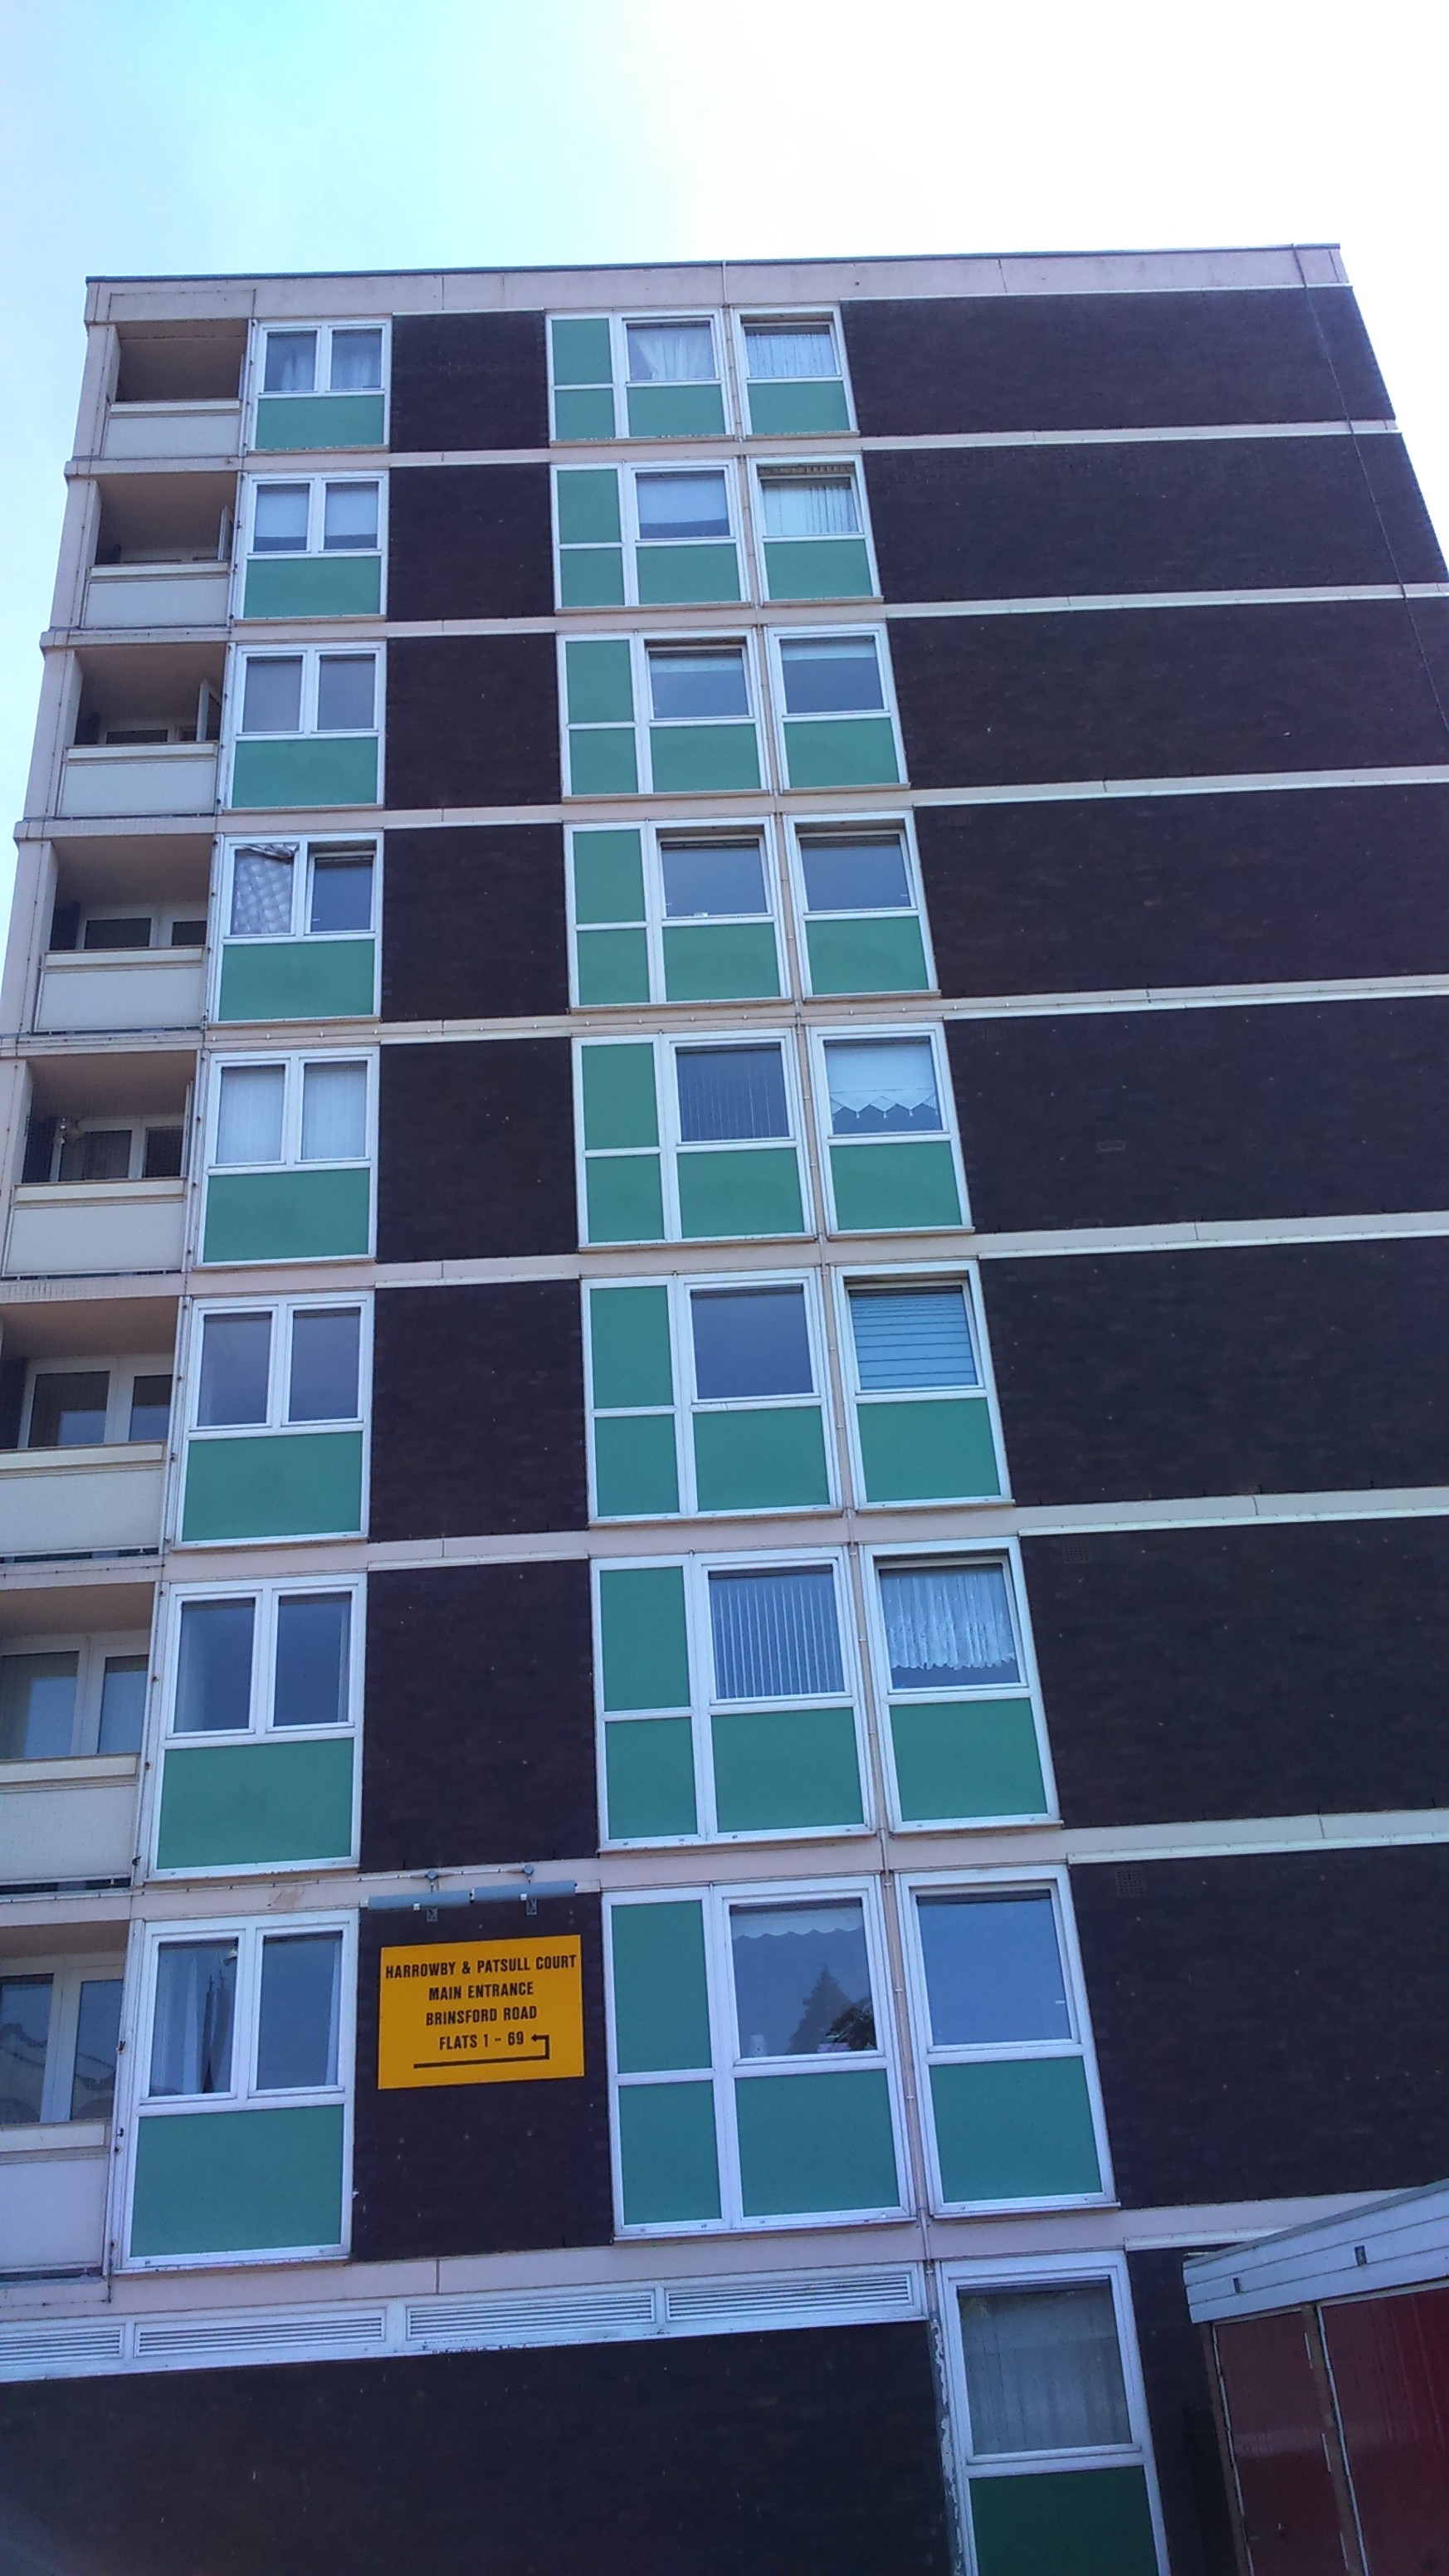 Unitrunk supplies trunking and cable trays for major social housing upgrade